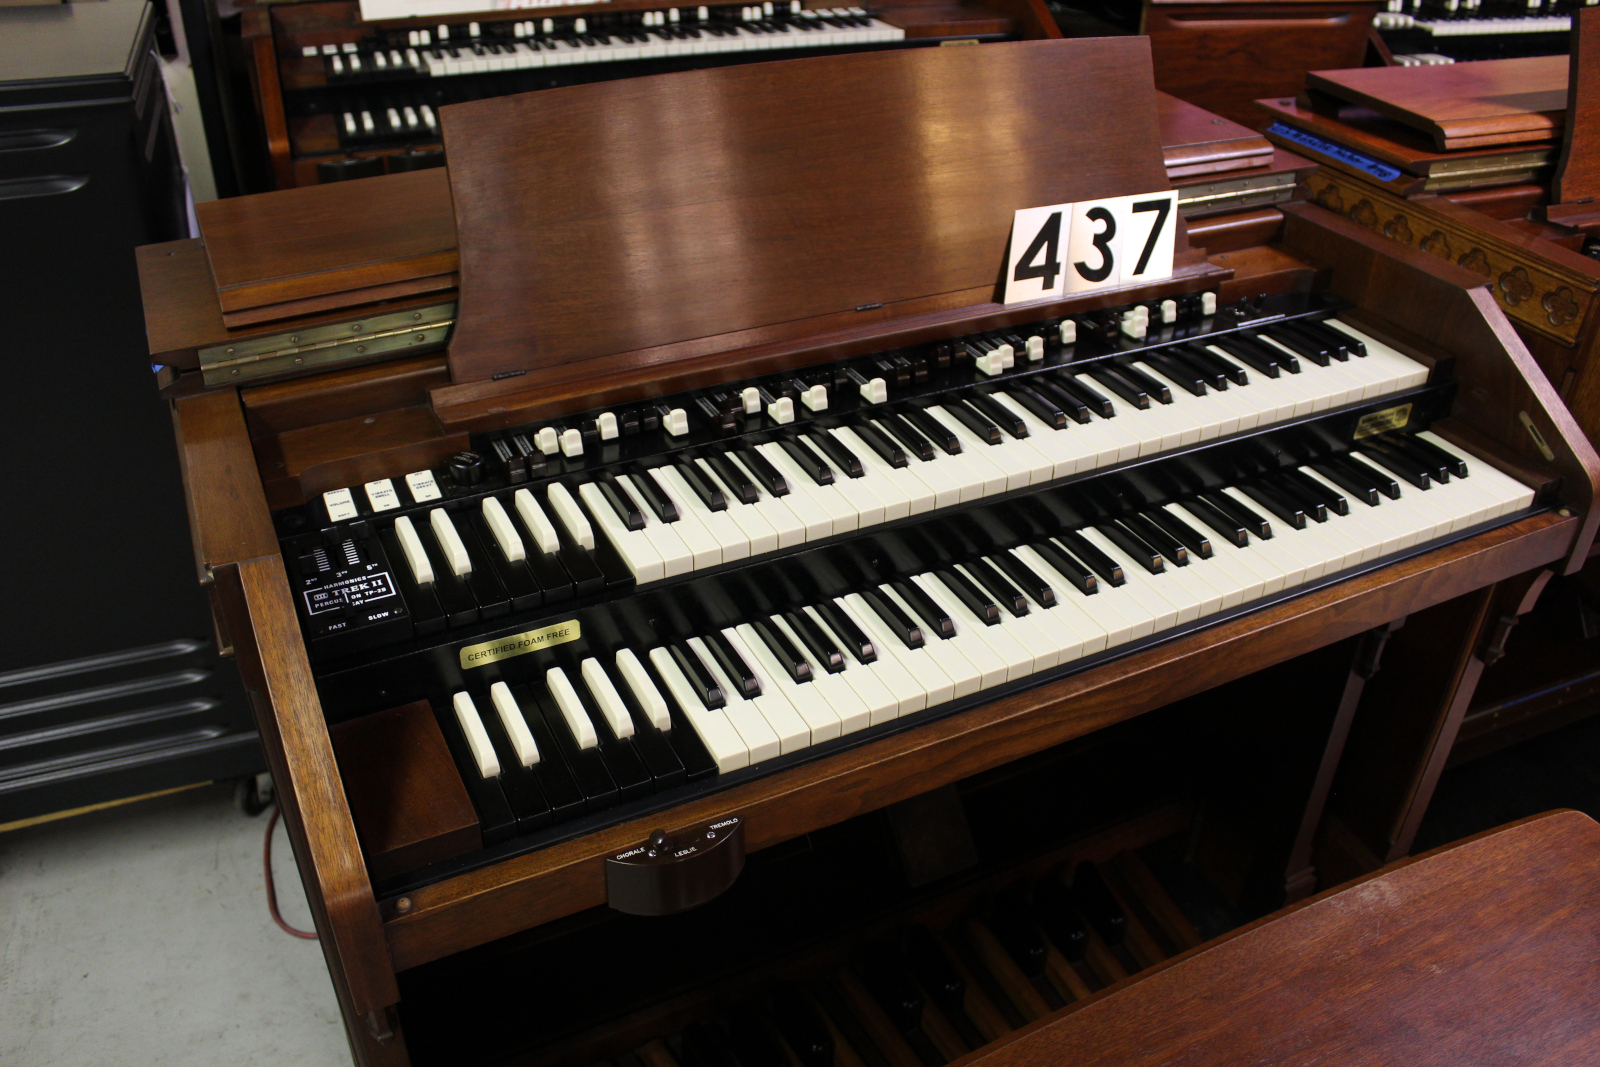 437 is a Hammond C2 but has been equipped with a percussion unit, allowing for it to be as versatile as a C3! Serial #48387 